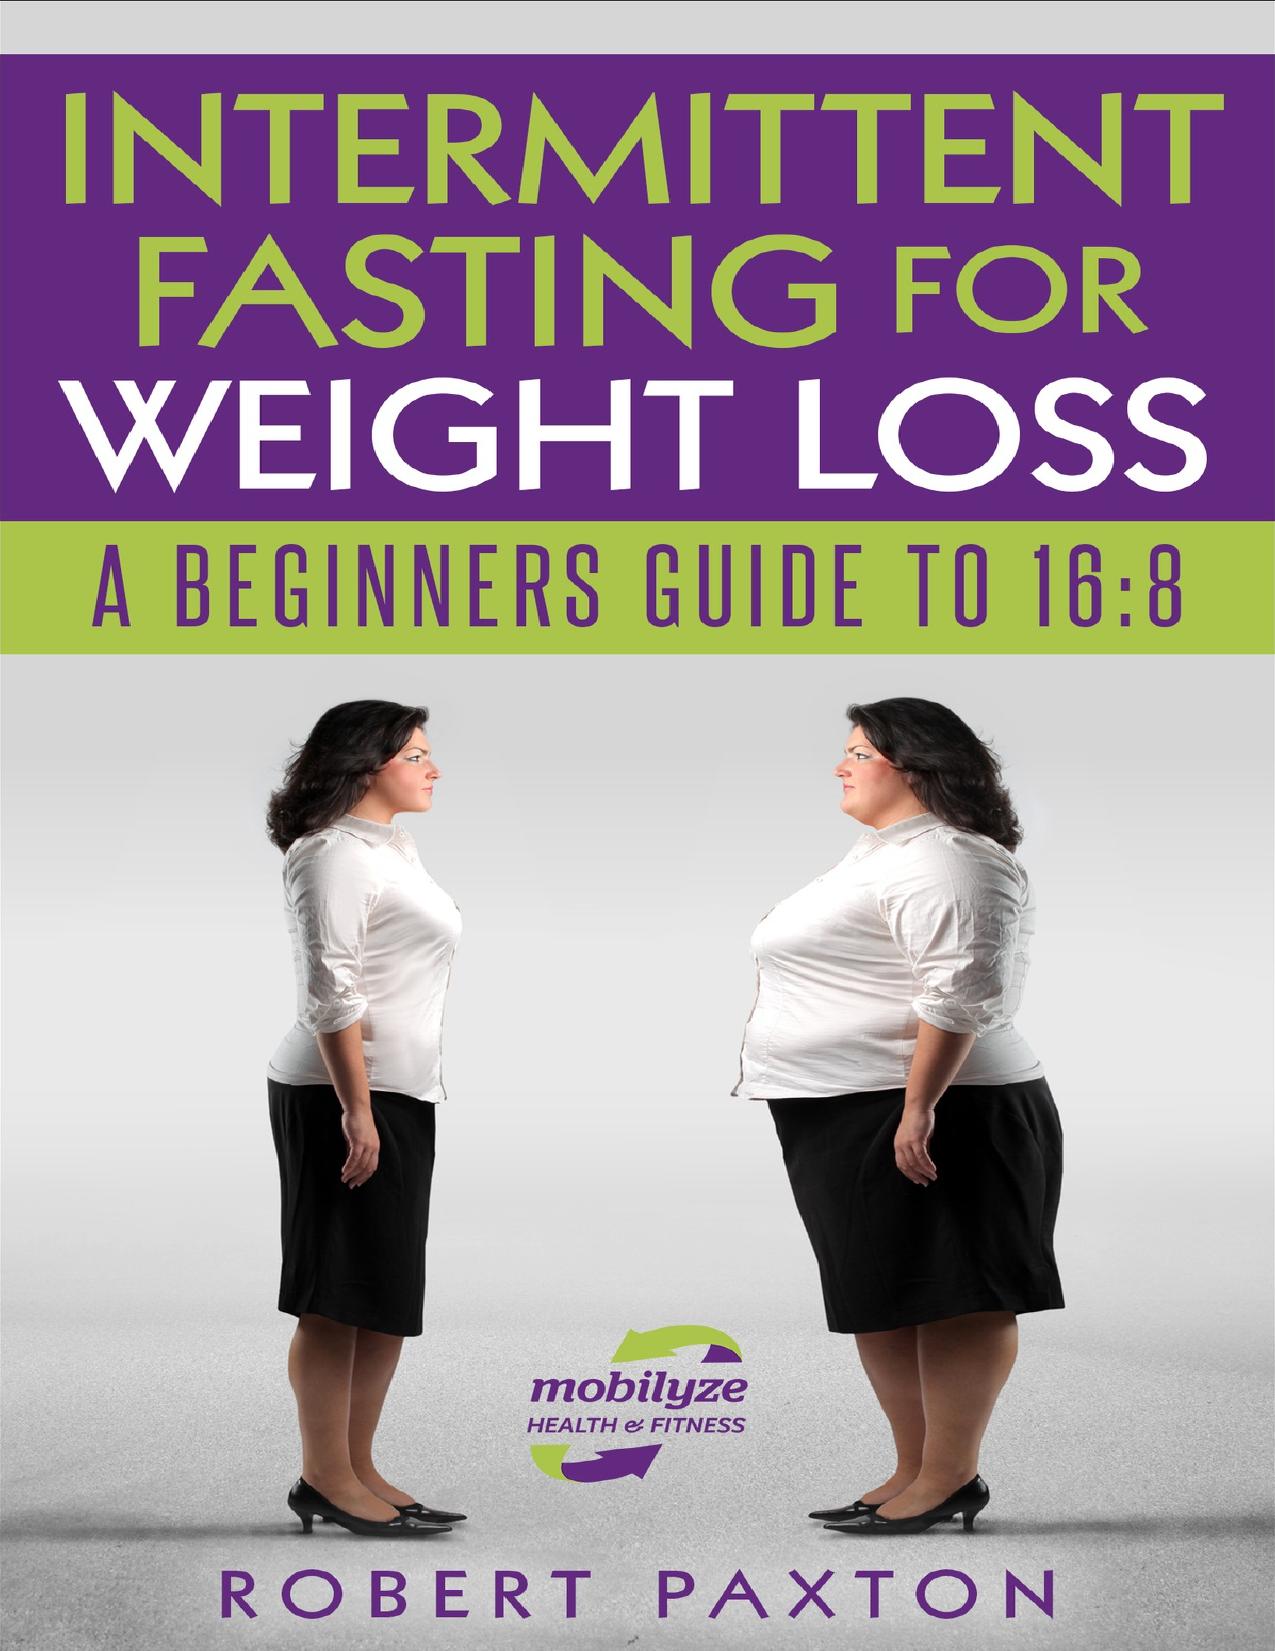 Intermittent Fasting For Weight Loss: A Beginners Guide To 16:8 by Robert Paxton